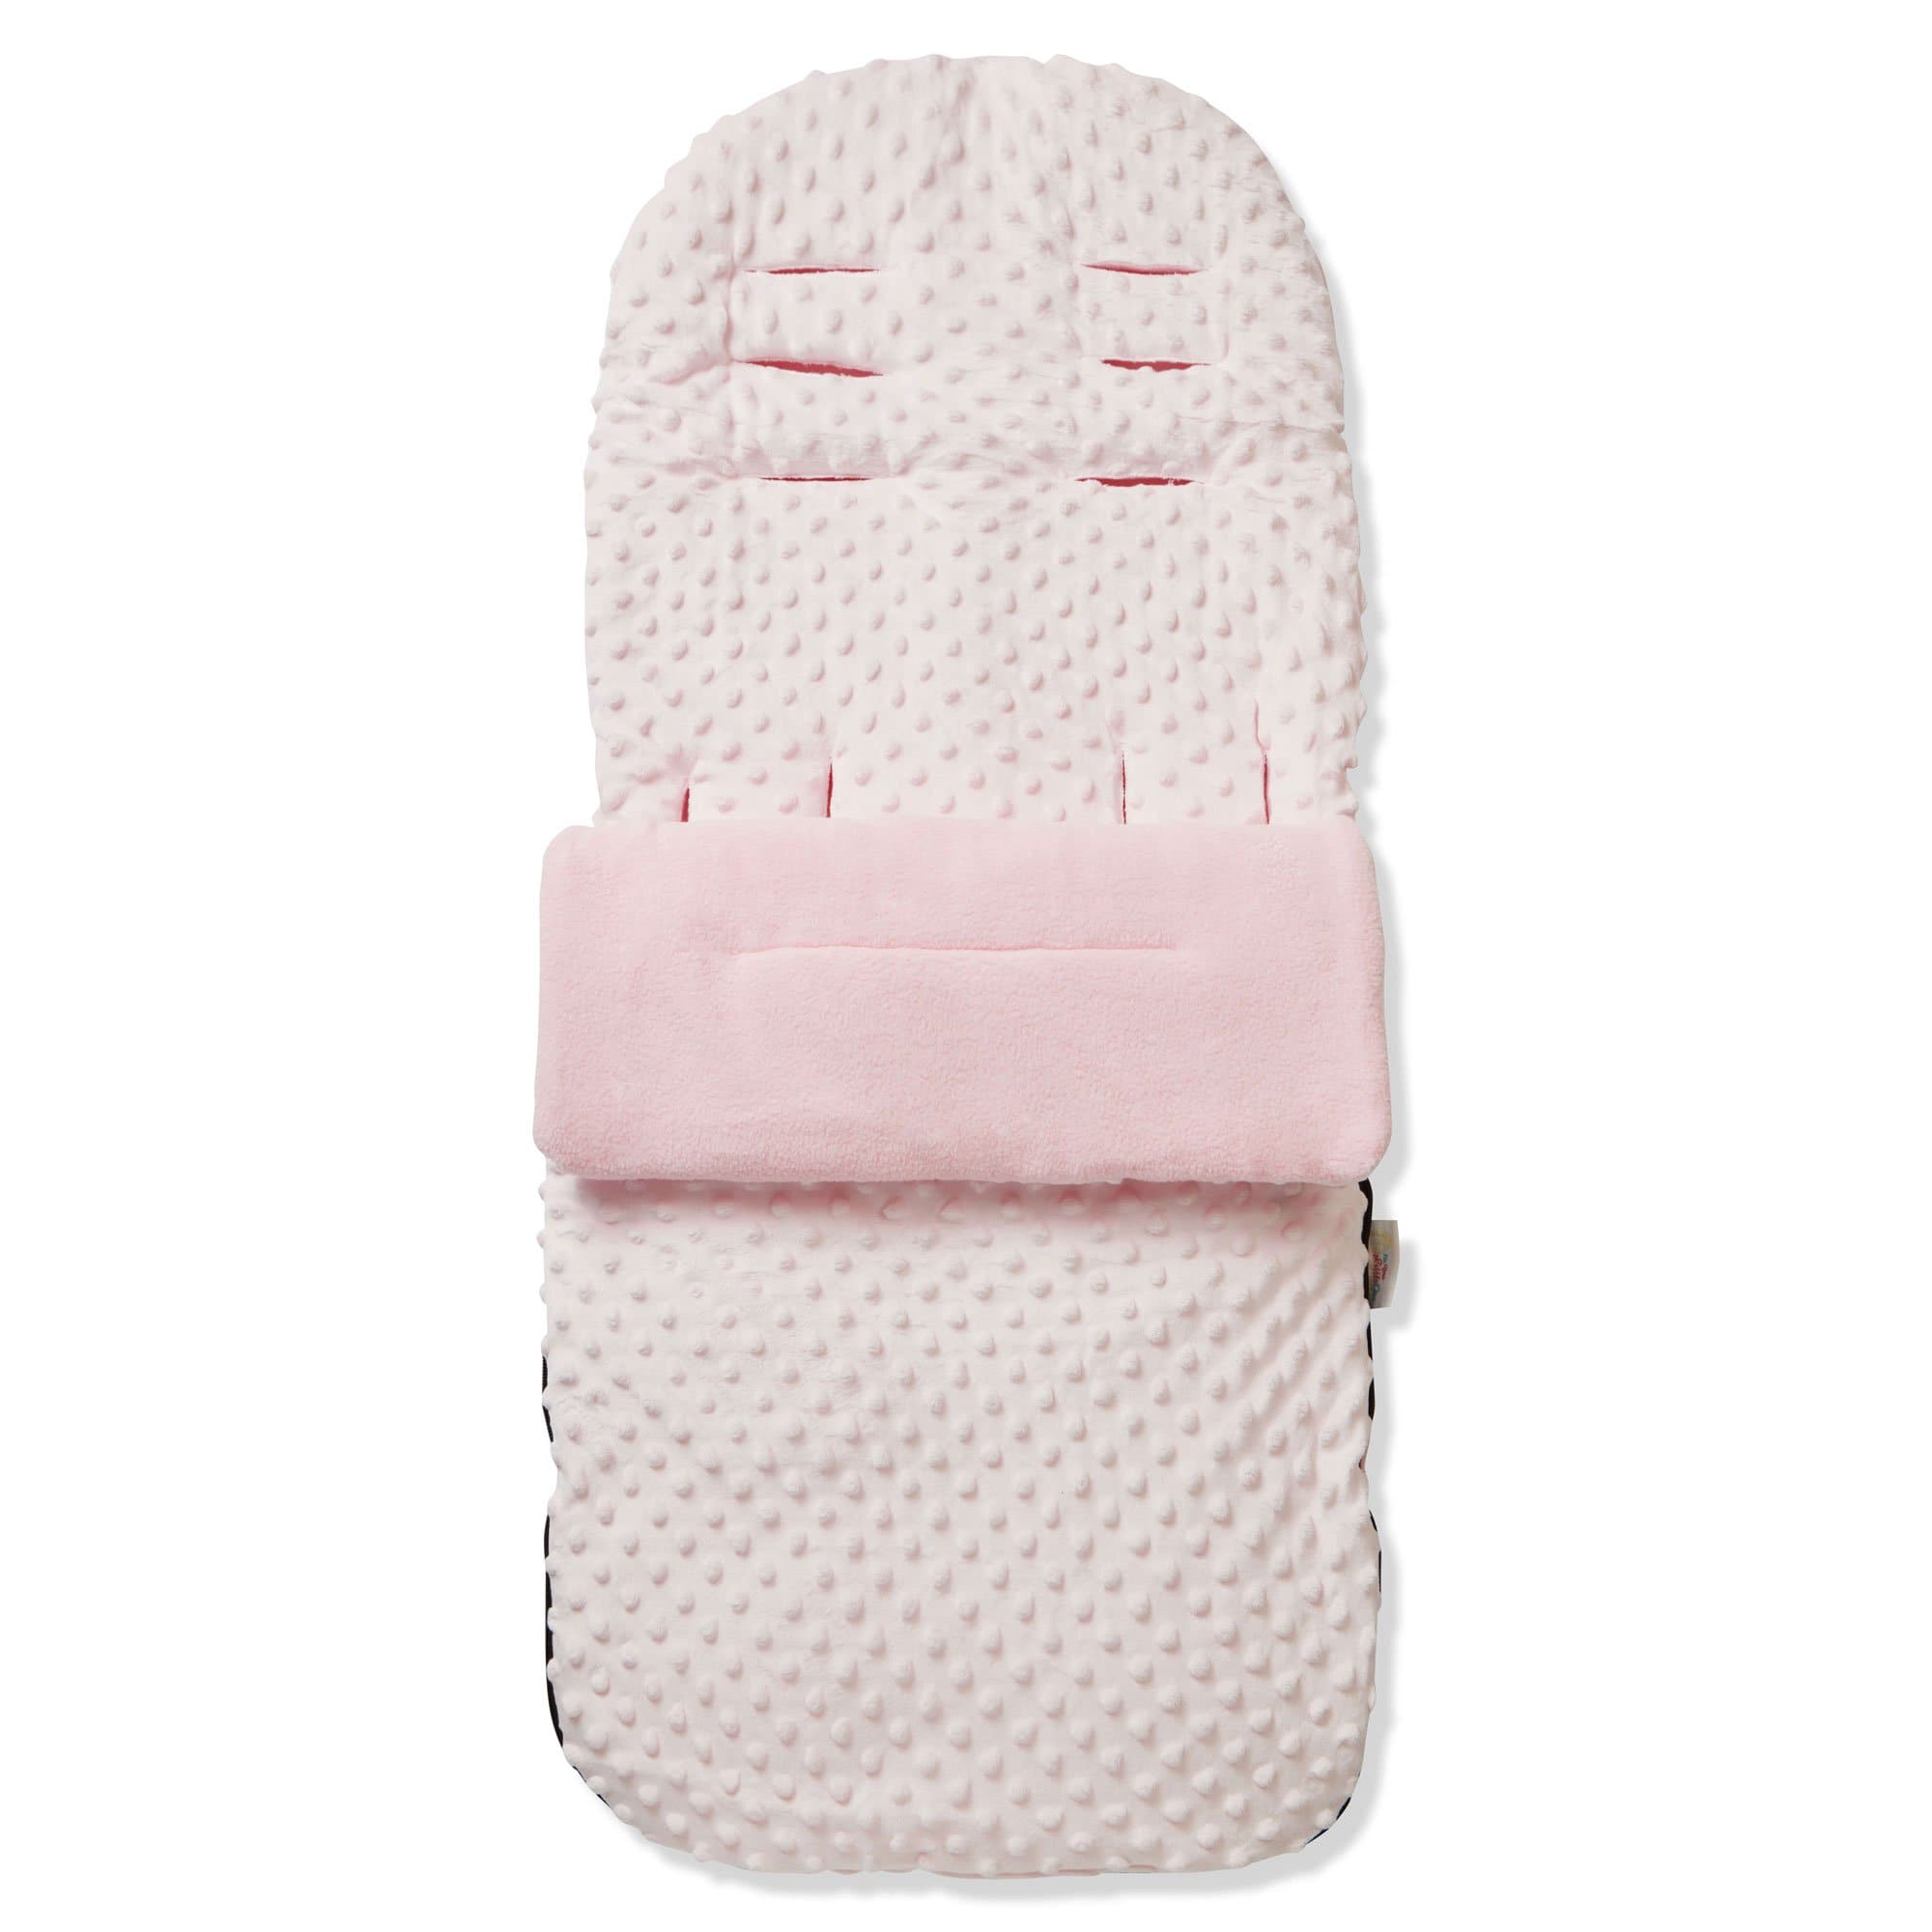 Dimple Footmuff / Cosy Toes Compatible with Obaby - Pink / Fits All Models | For Your Little One